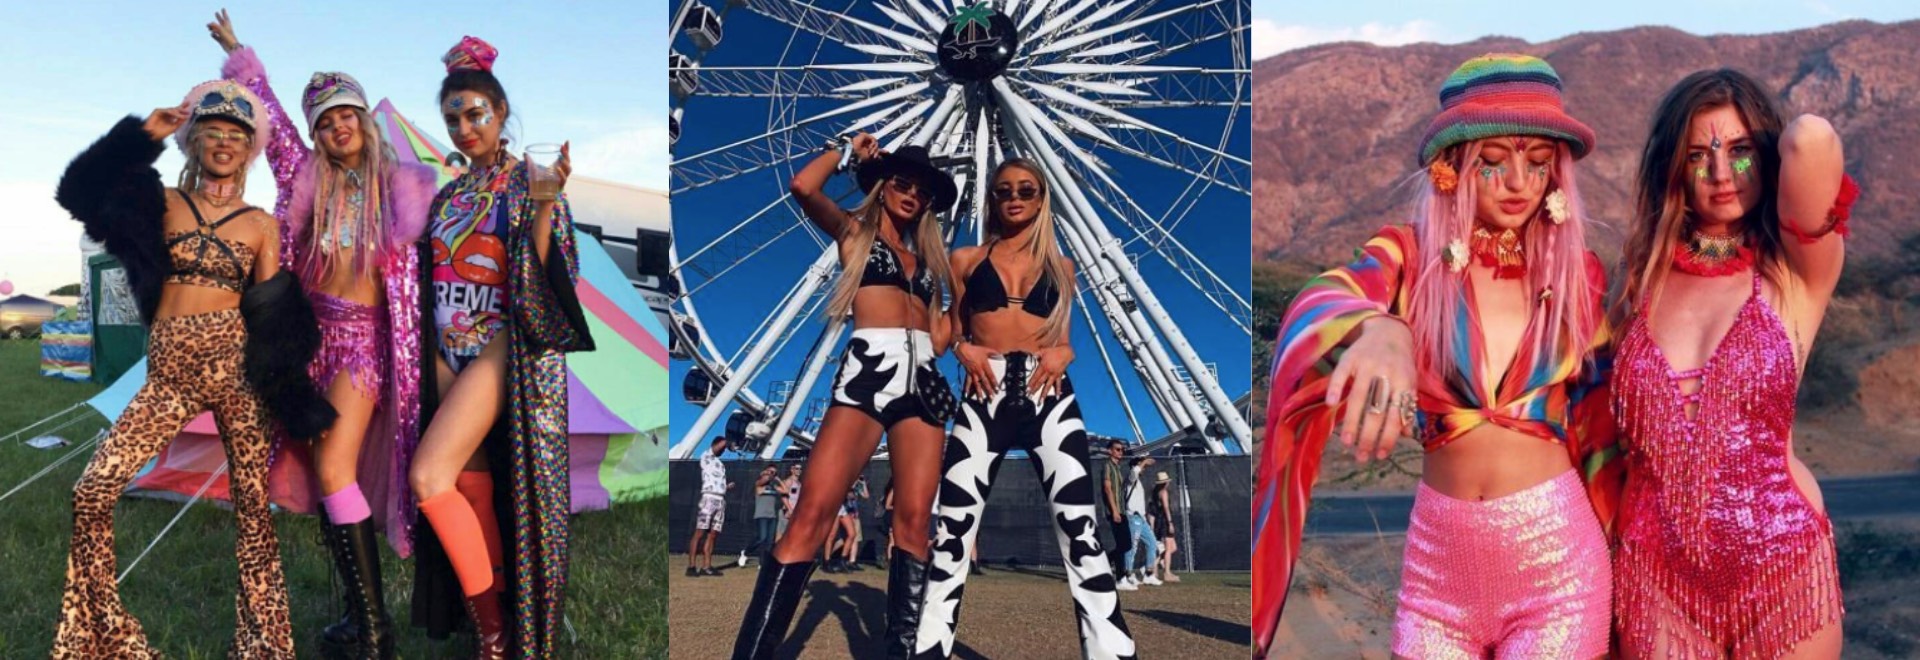 The Essential Festival Outfits, Makeup and Survival Kit for an